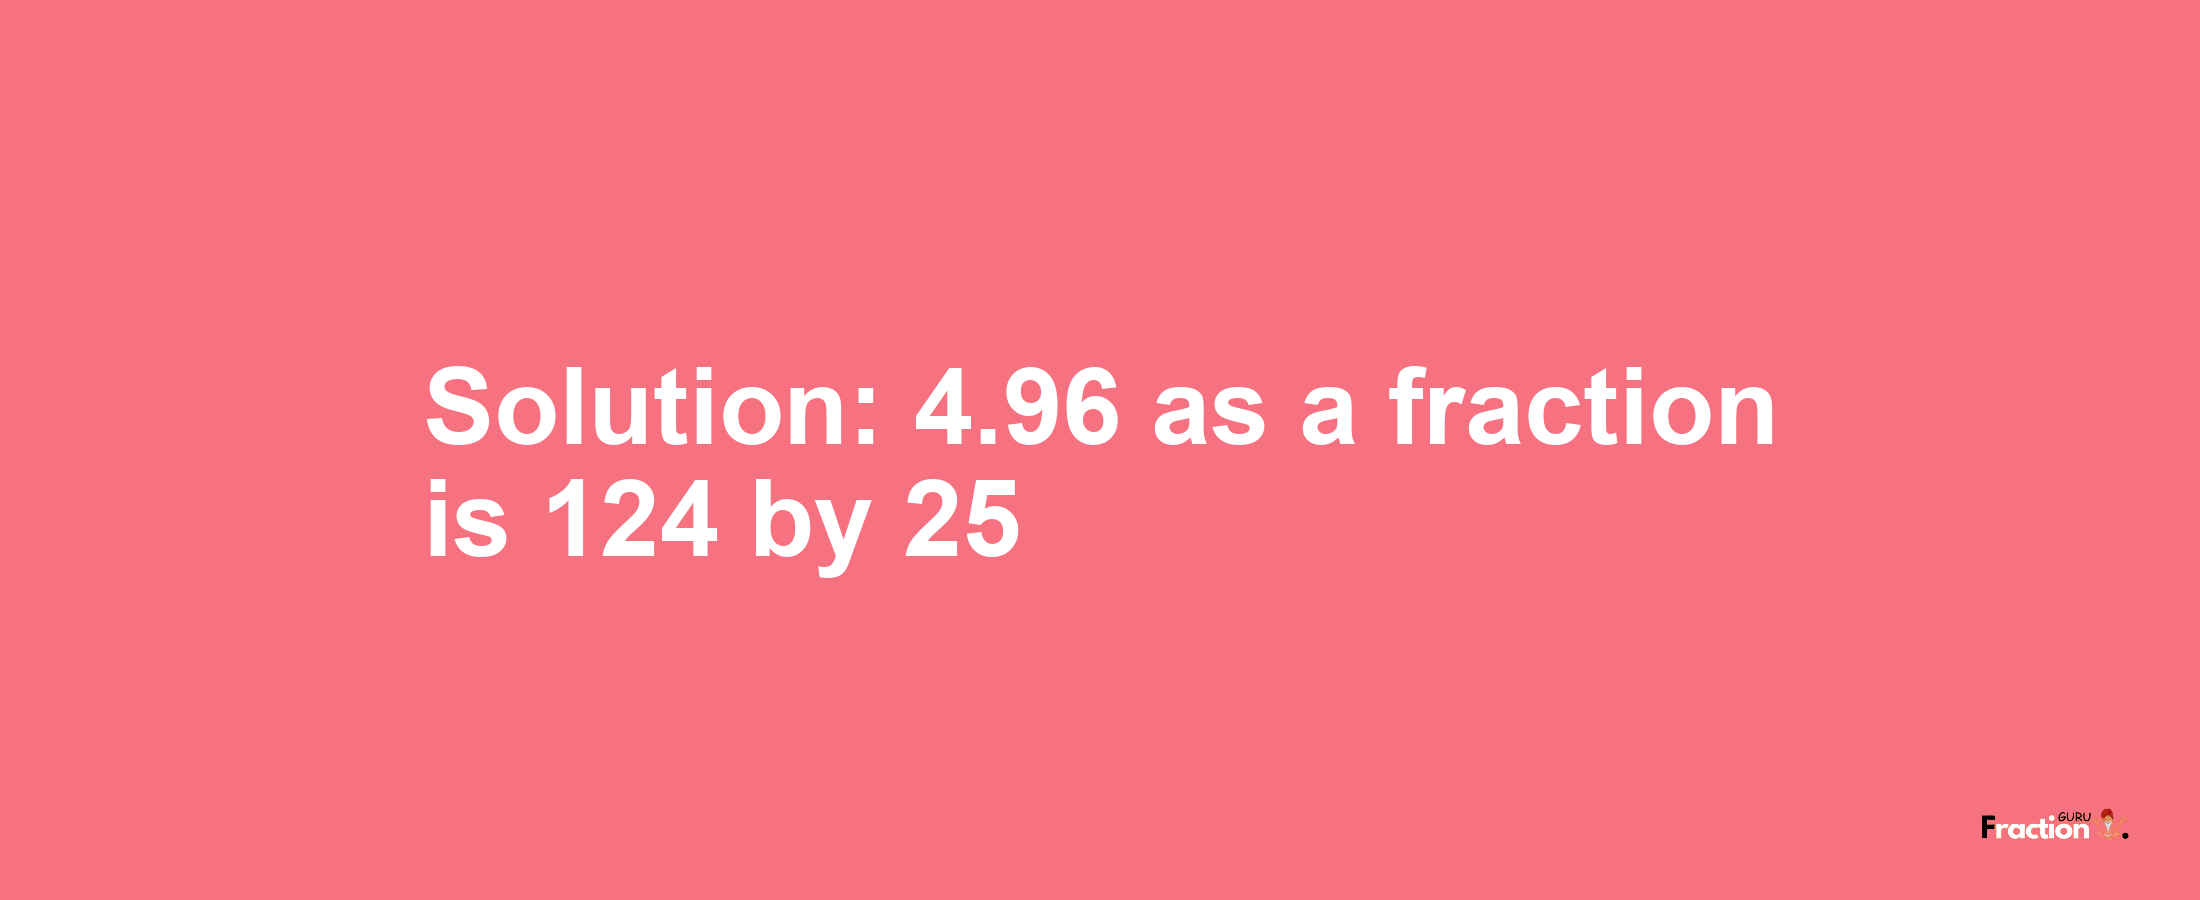 Solution:4.96 as a fraction is 124/25